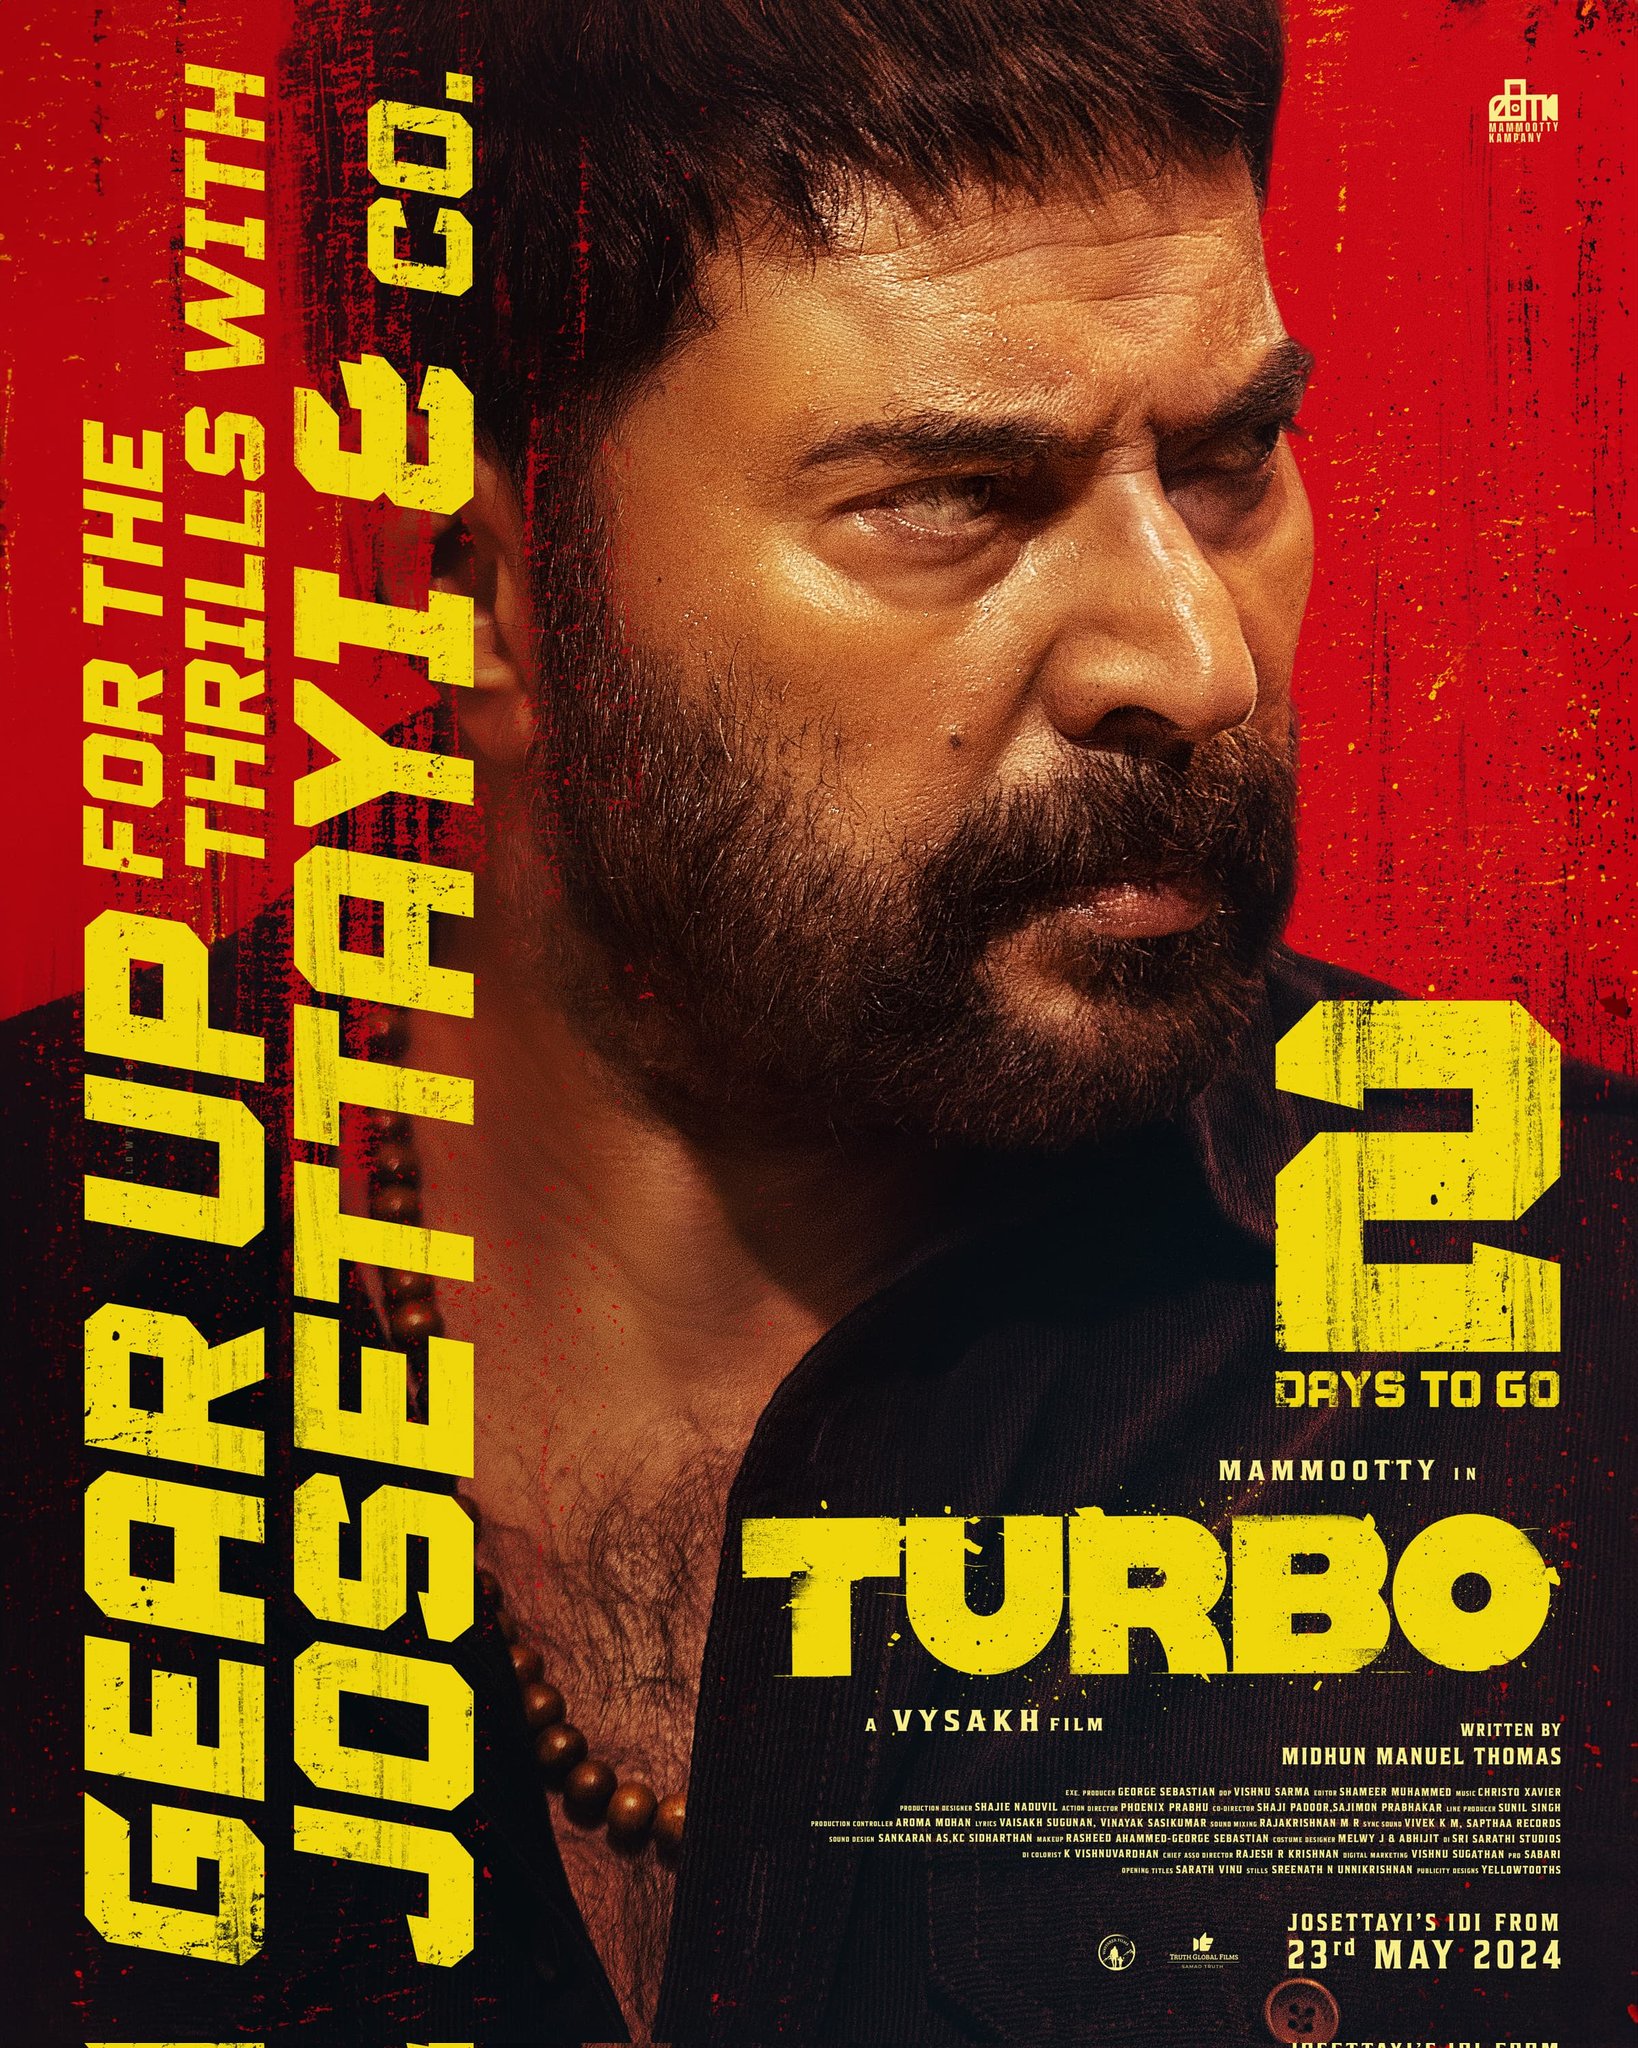 All Time Record overseas release for Mollywood, Turbo movie Overseas Release locations, Mammootty latest Movie update, Mammootty Latest Movie Turbo, Turbo Movie updates,